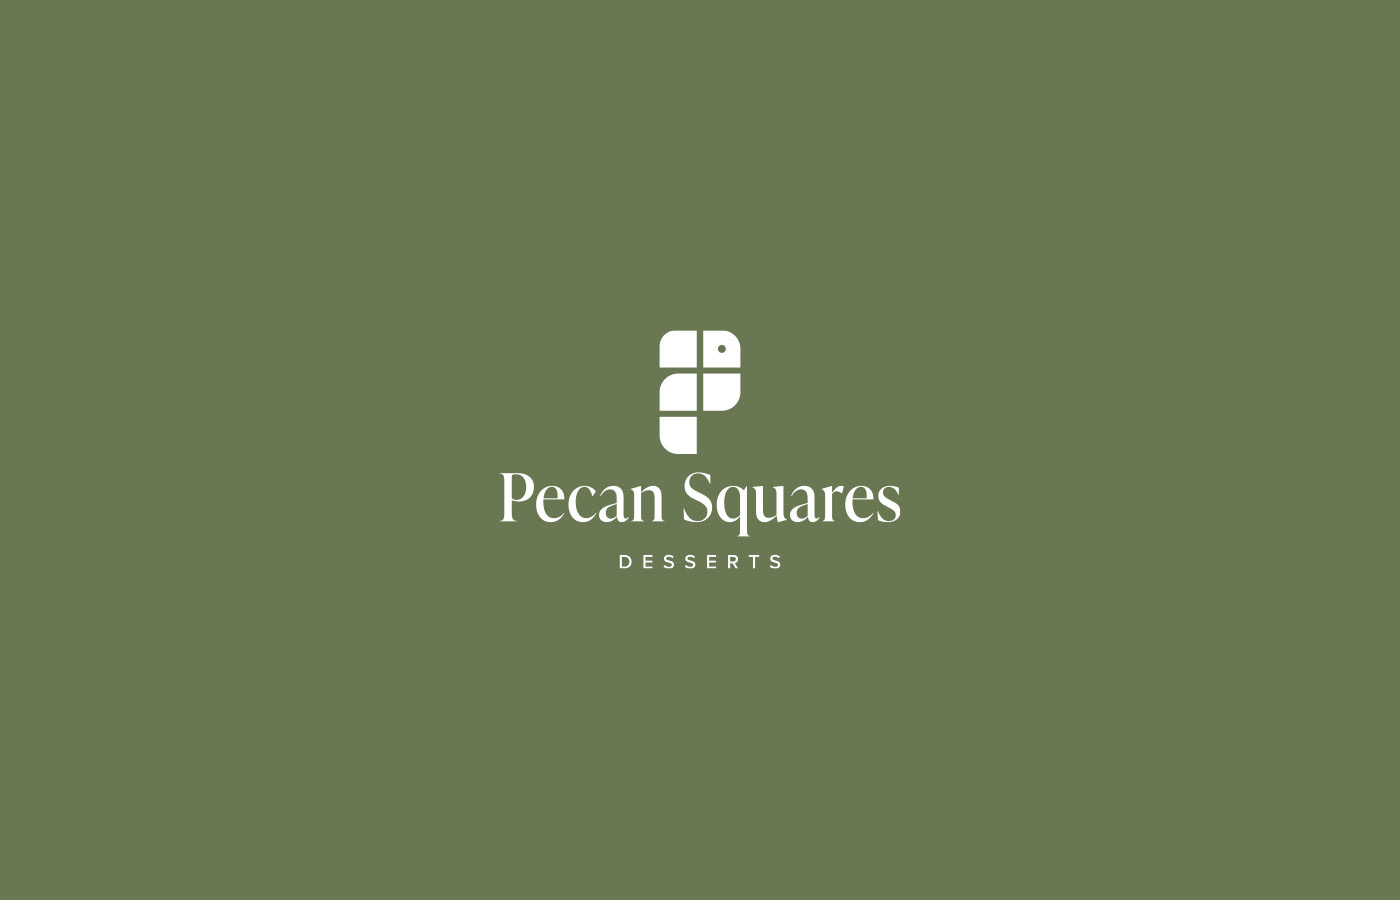 Logo of Pecan Square, brand of homemade desserts made from nuts